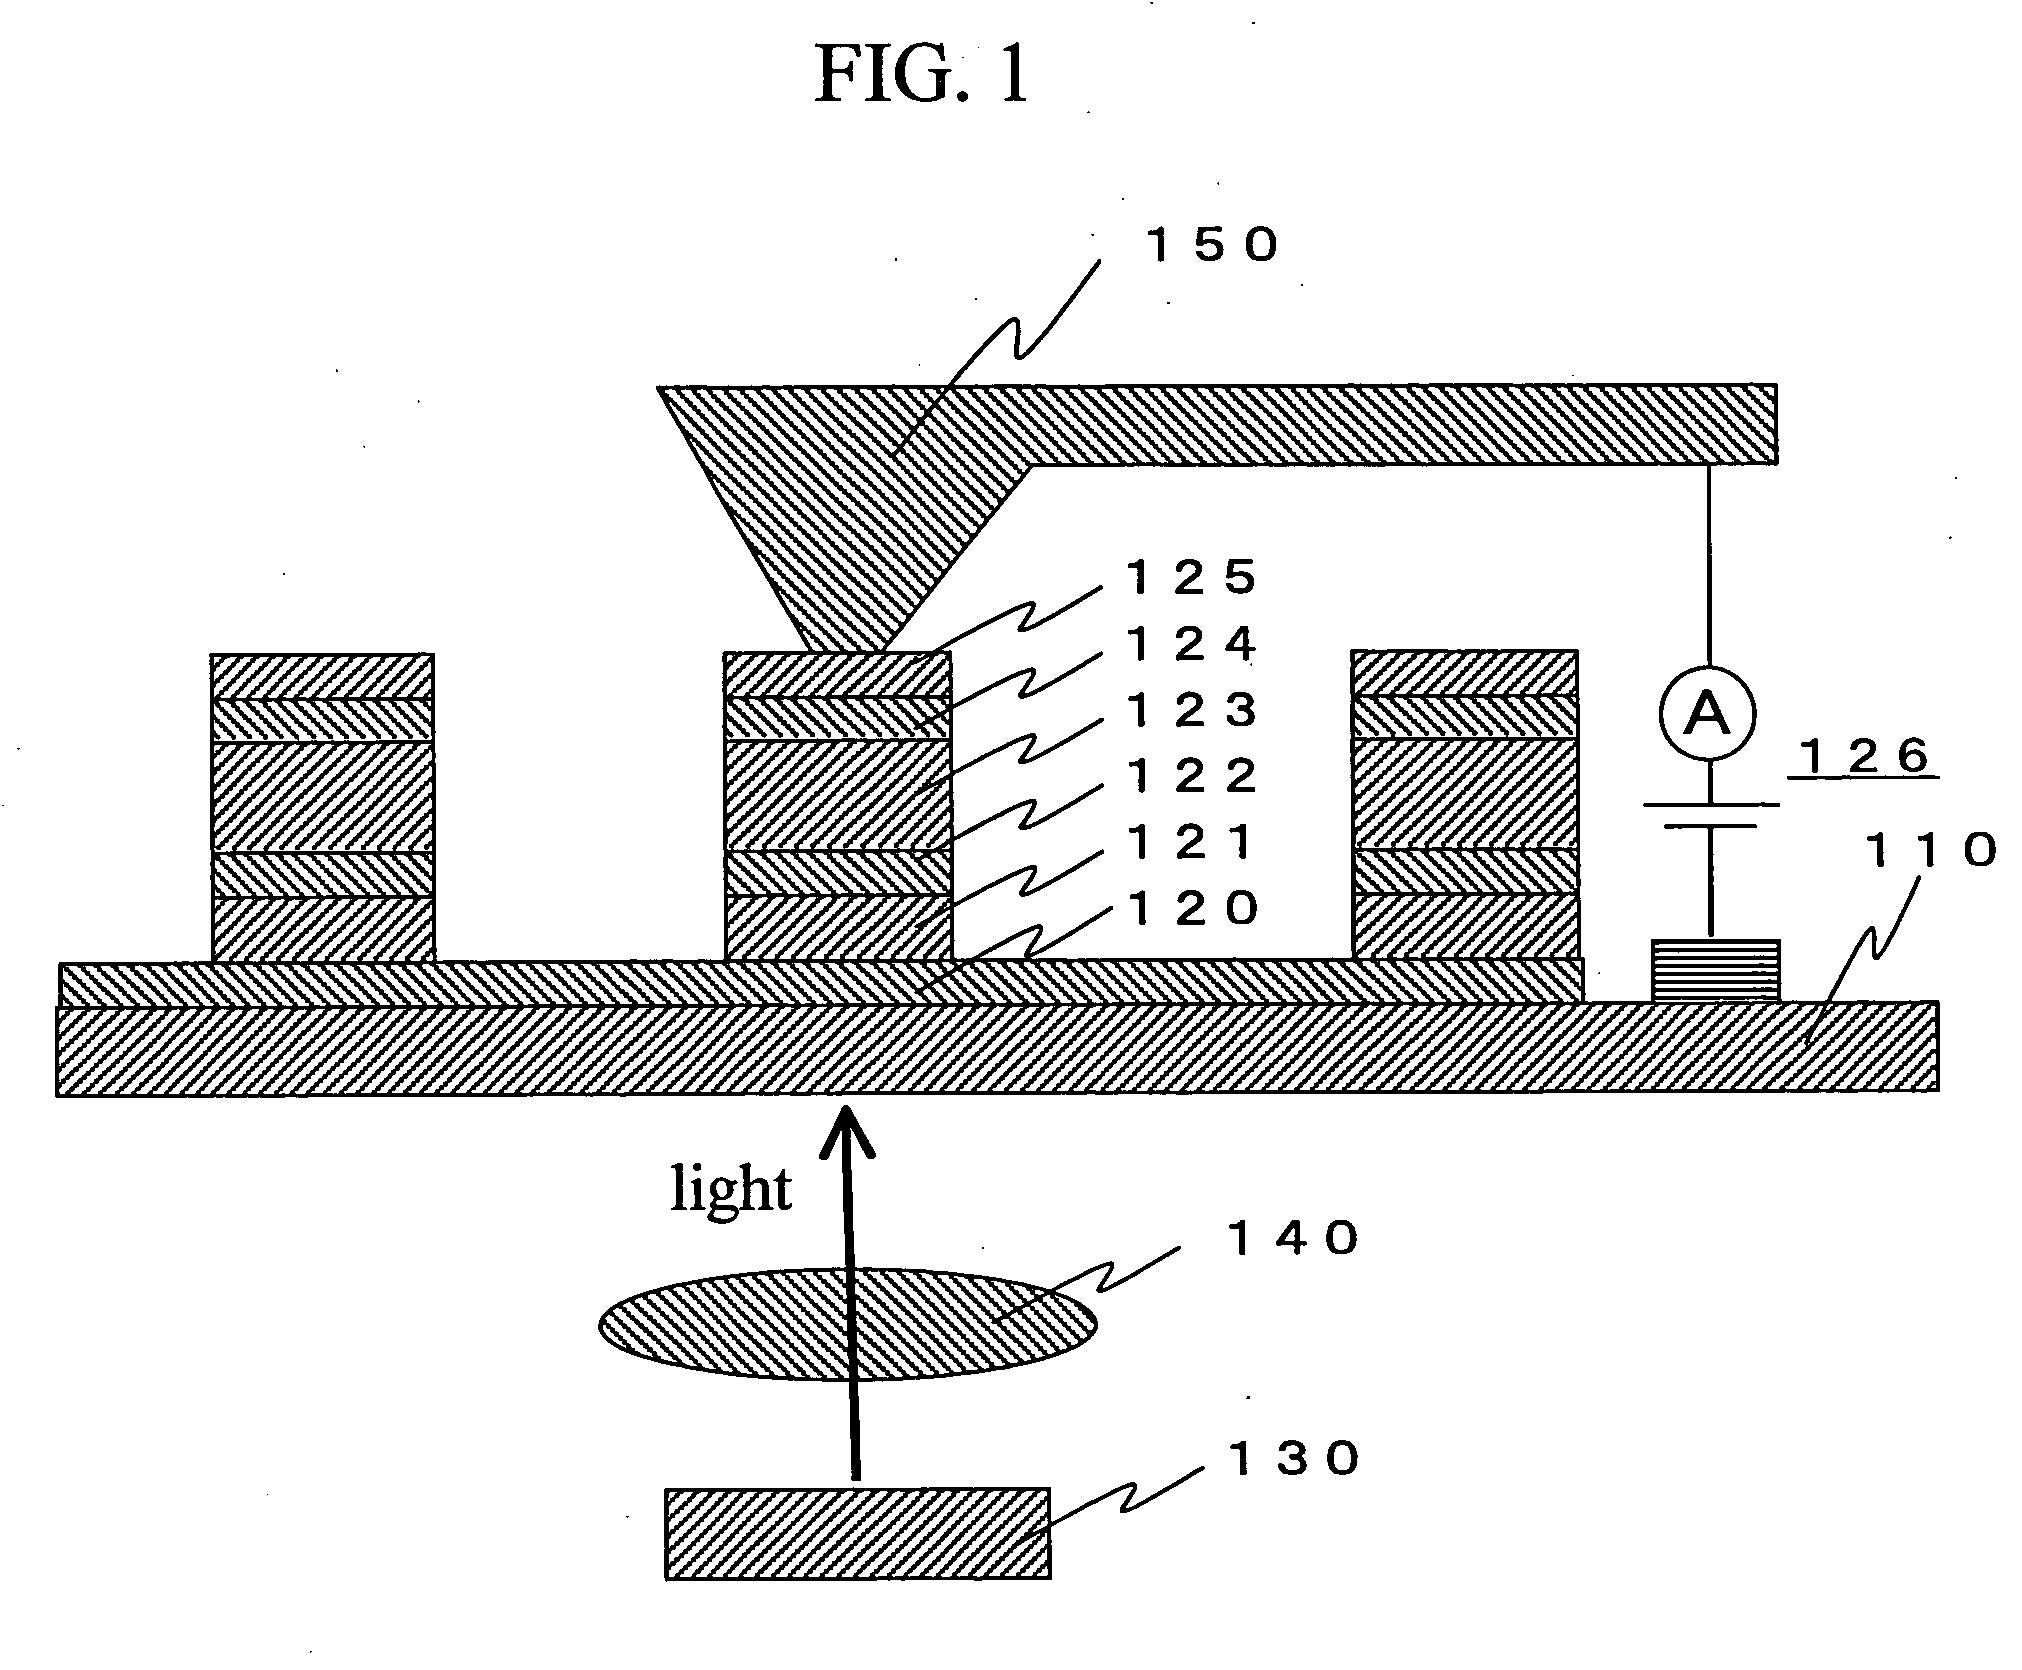 Magnetic recording apparatus using magnetization reversal by spin injection with thermal assistance